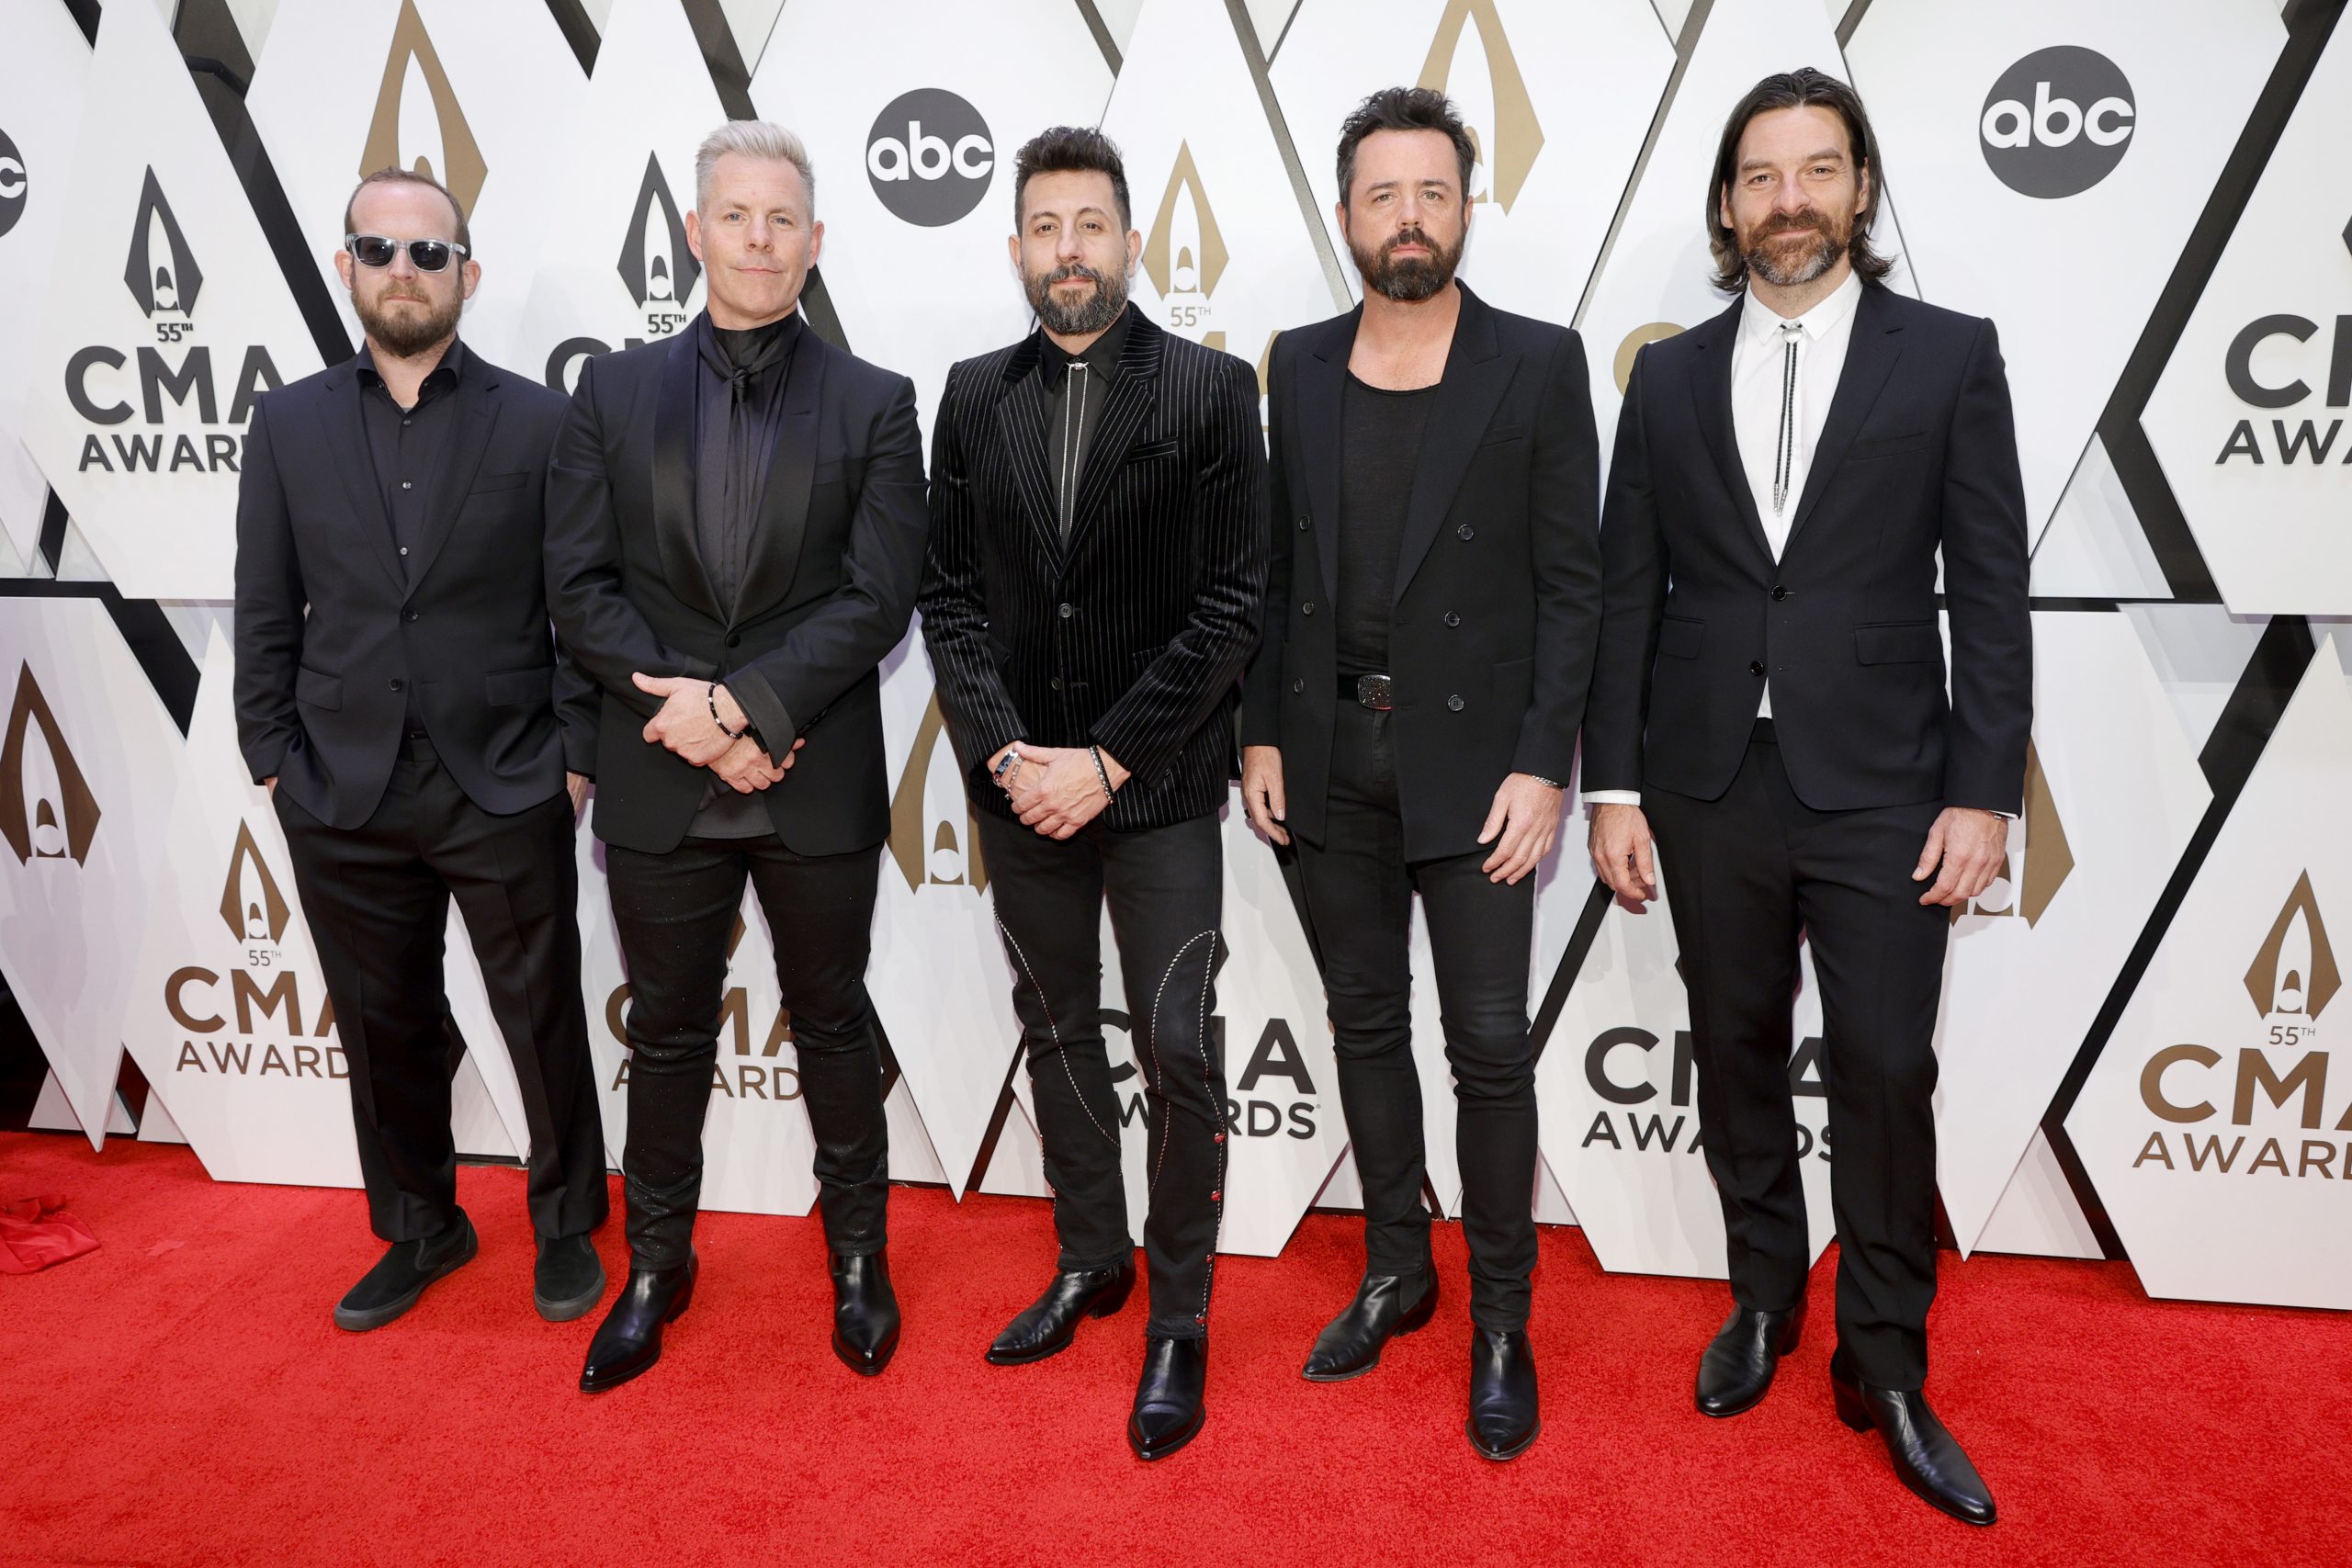 55th Annual Cma Awards See The Red Carpet Photos Sounds Like Nashville